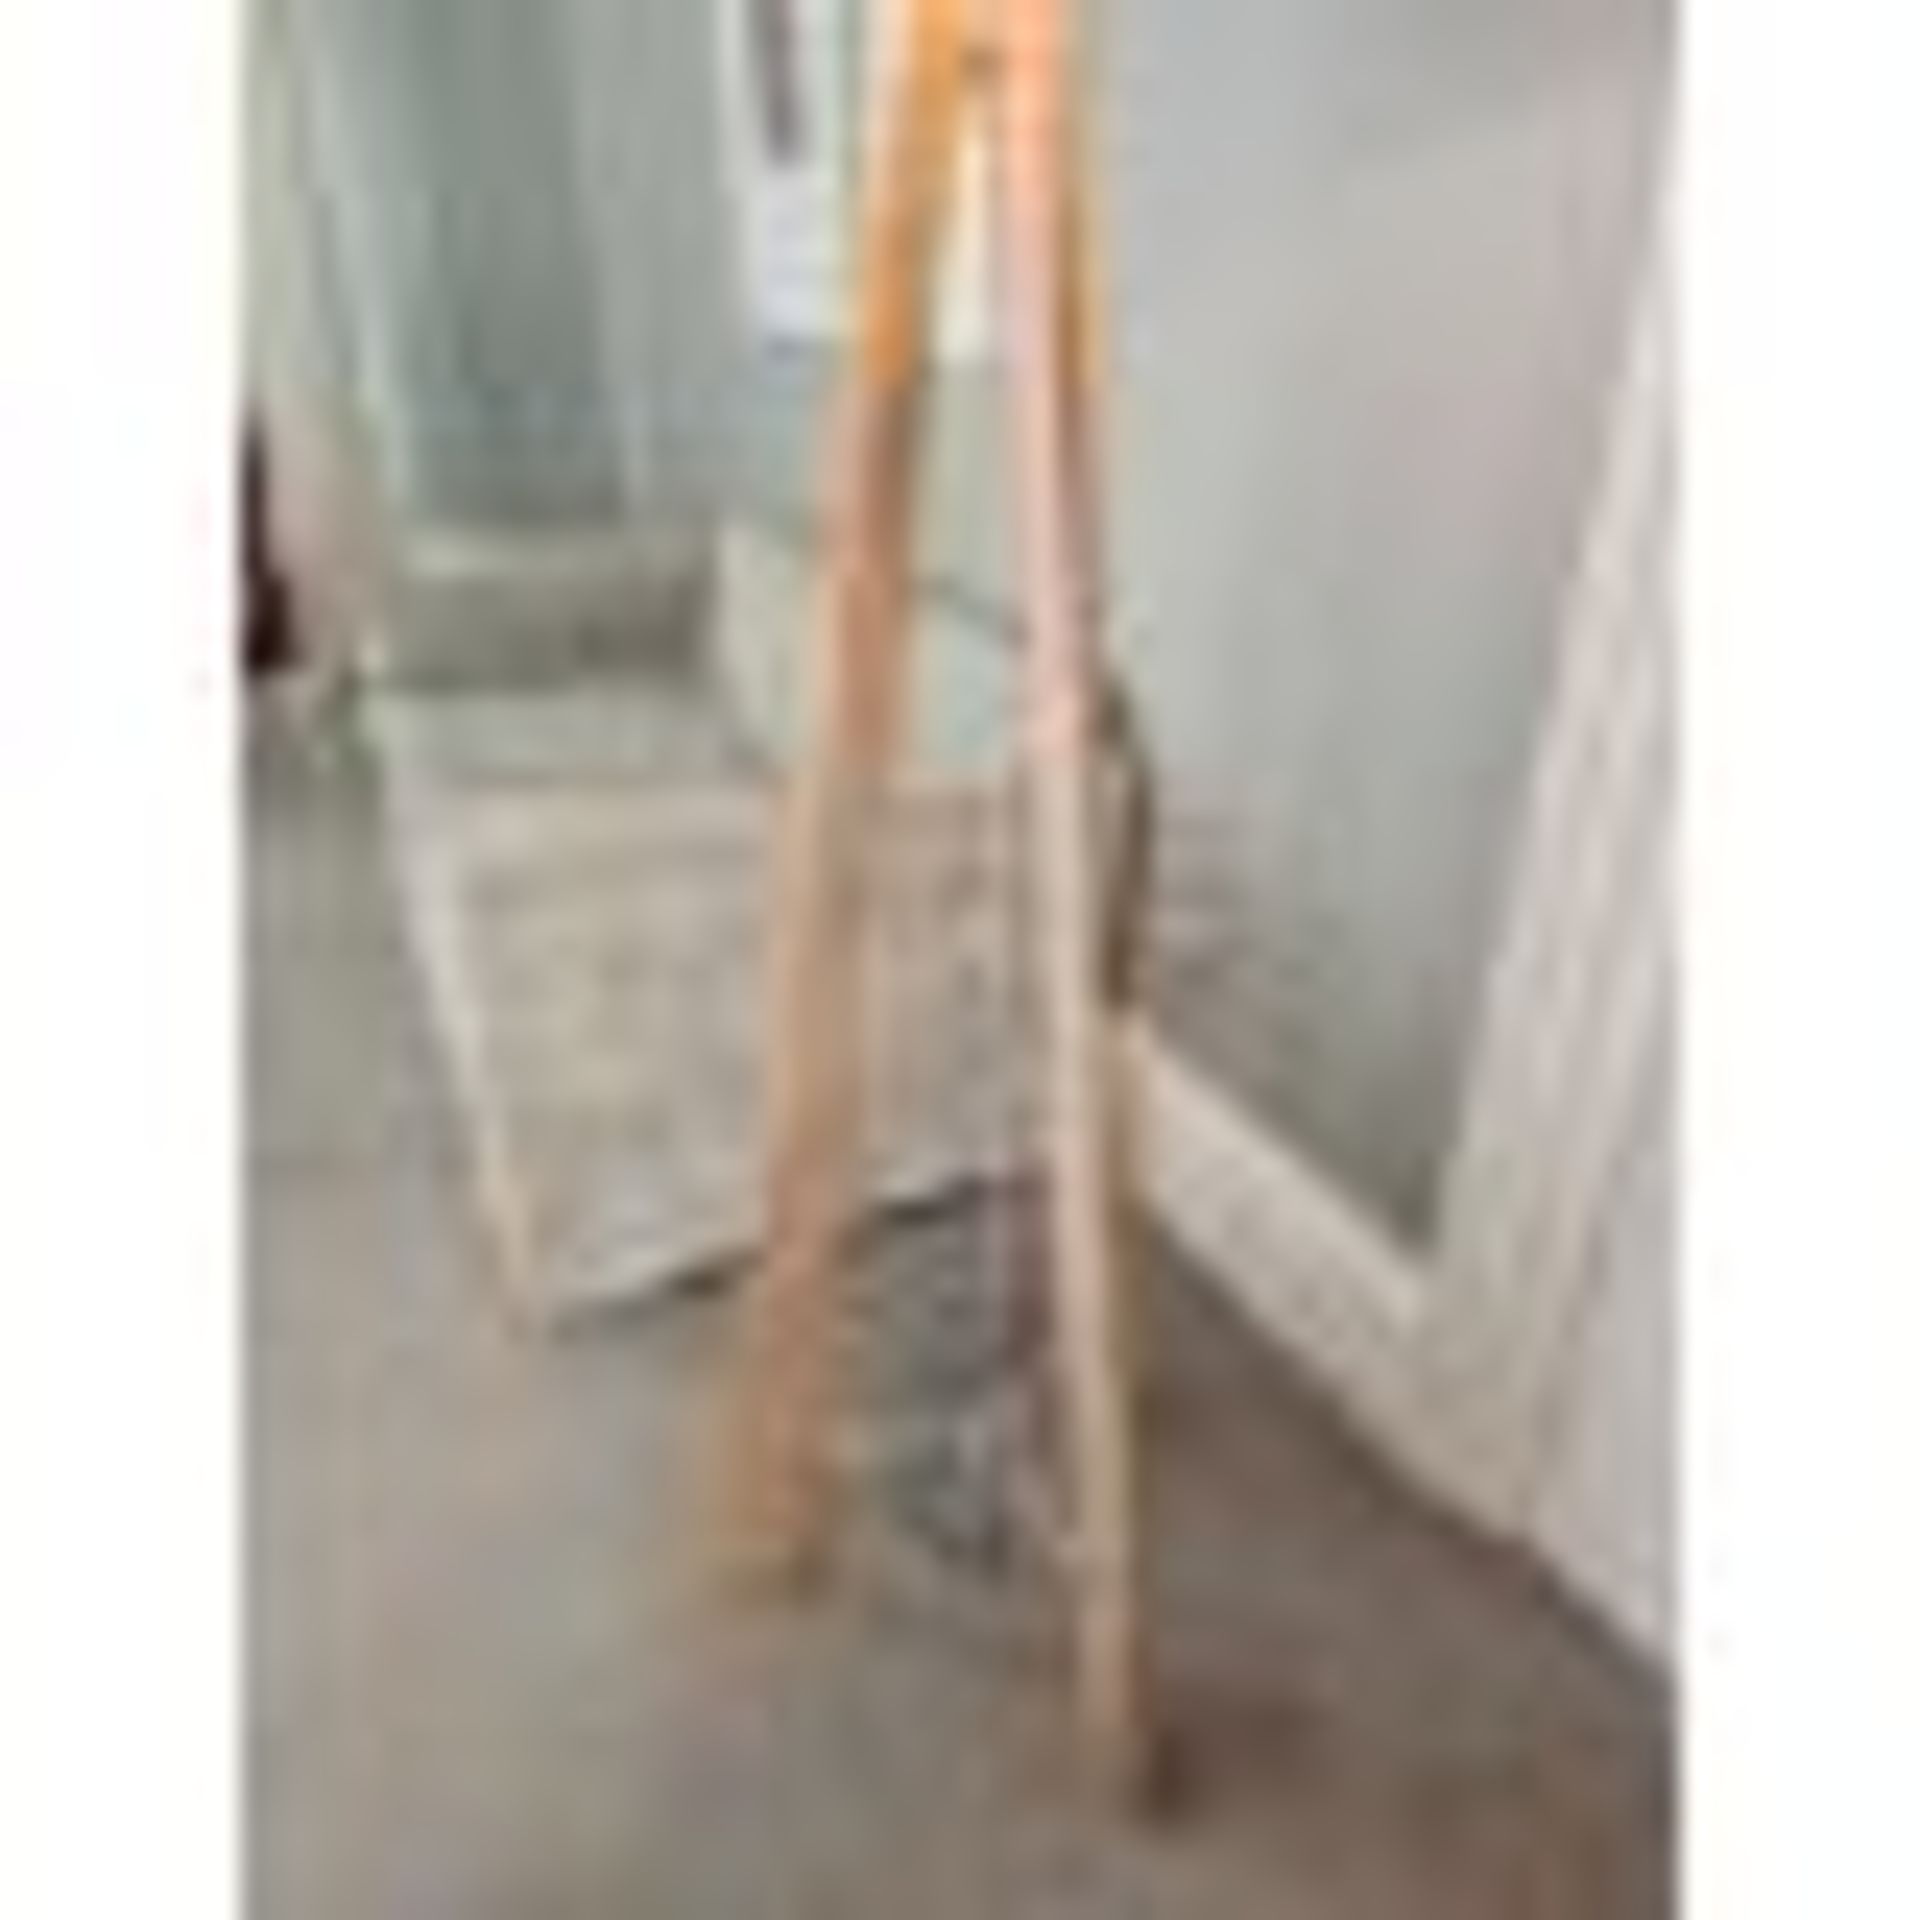 Pavillion Pr Home Tri Floor Lamp The Tri Is A Large Floor Lamp Available In Natural Meh Wood The - Bild 2 aus 2